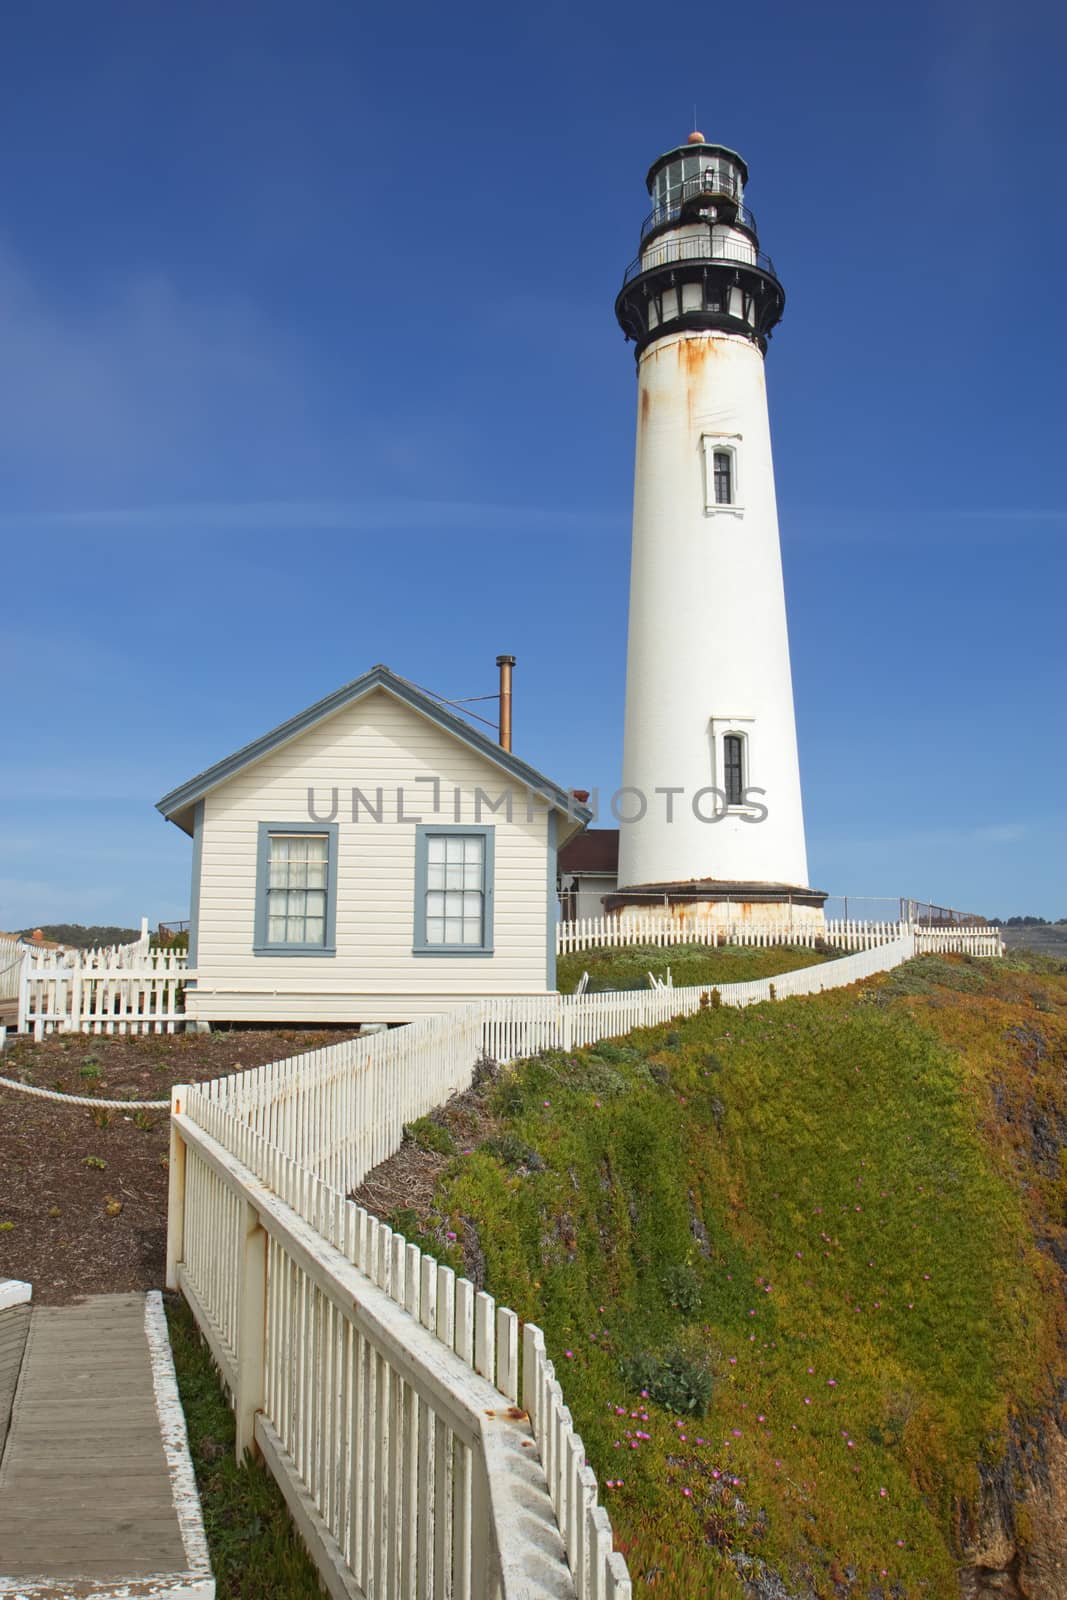 The Pigeon Point lighthouse on the central coast of California by sgoodwin4813